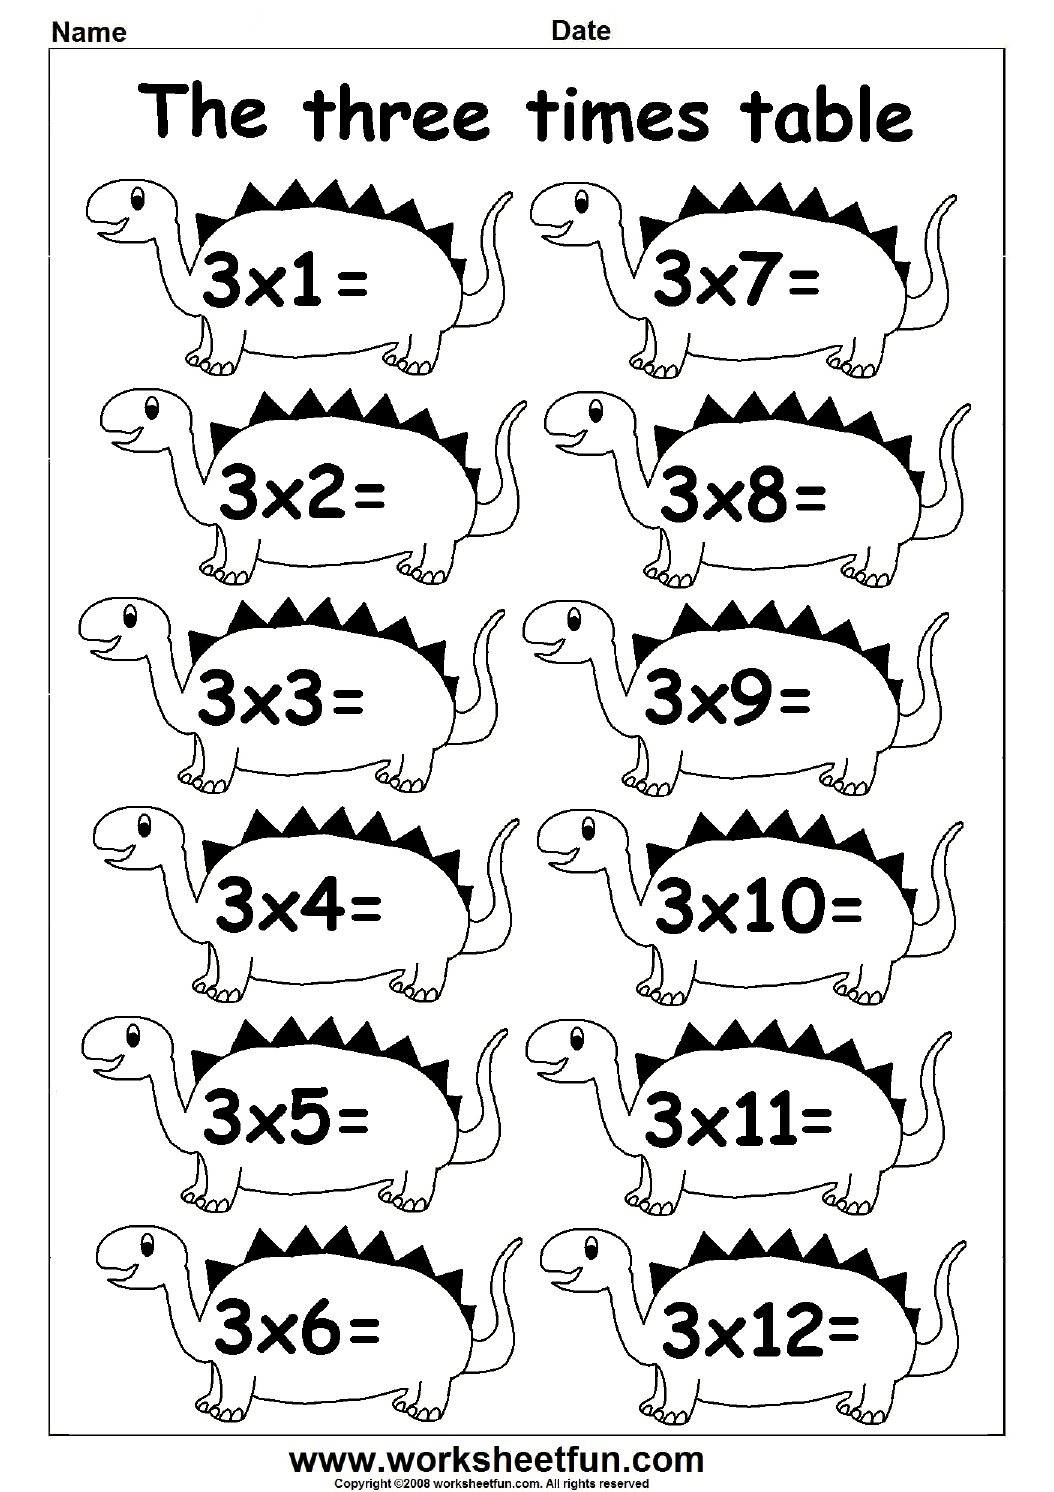  Multiplication Times Tables Worksheets 2 3 4 5 Times Tables Four Worksheets FREE 